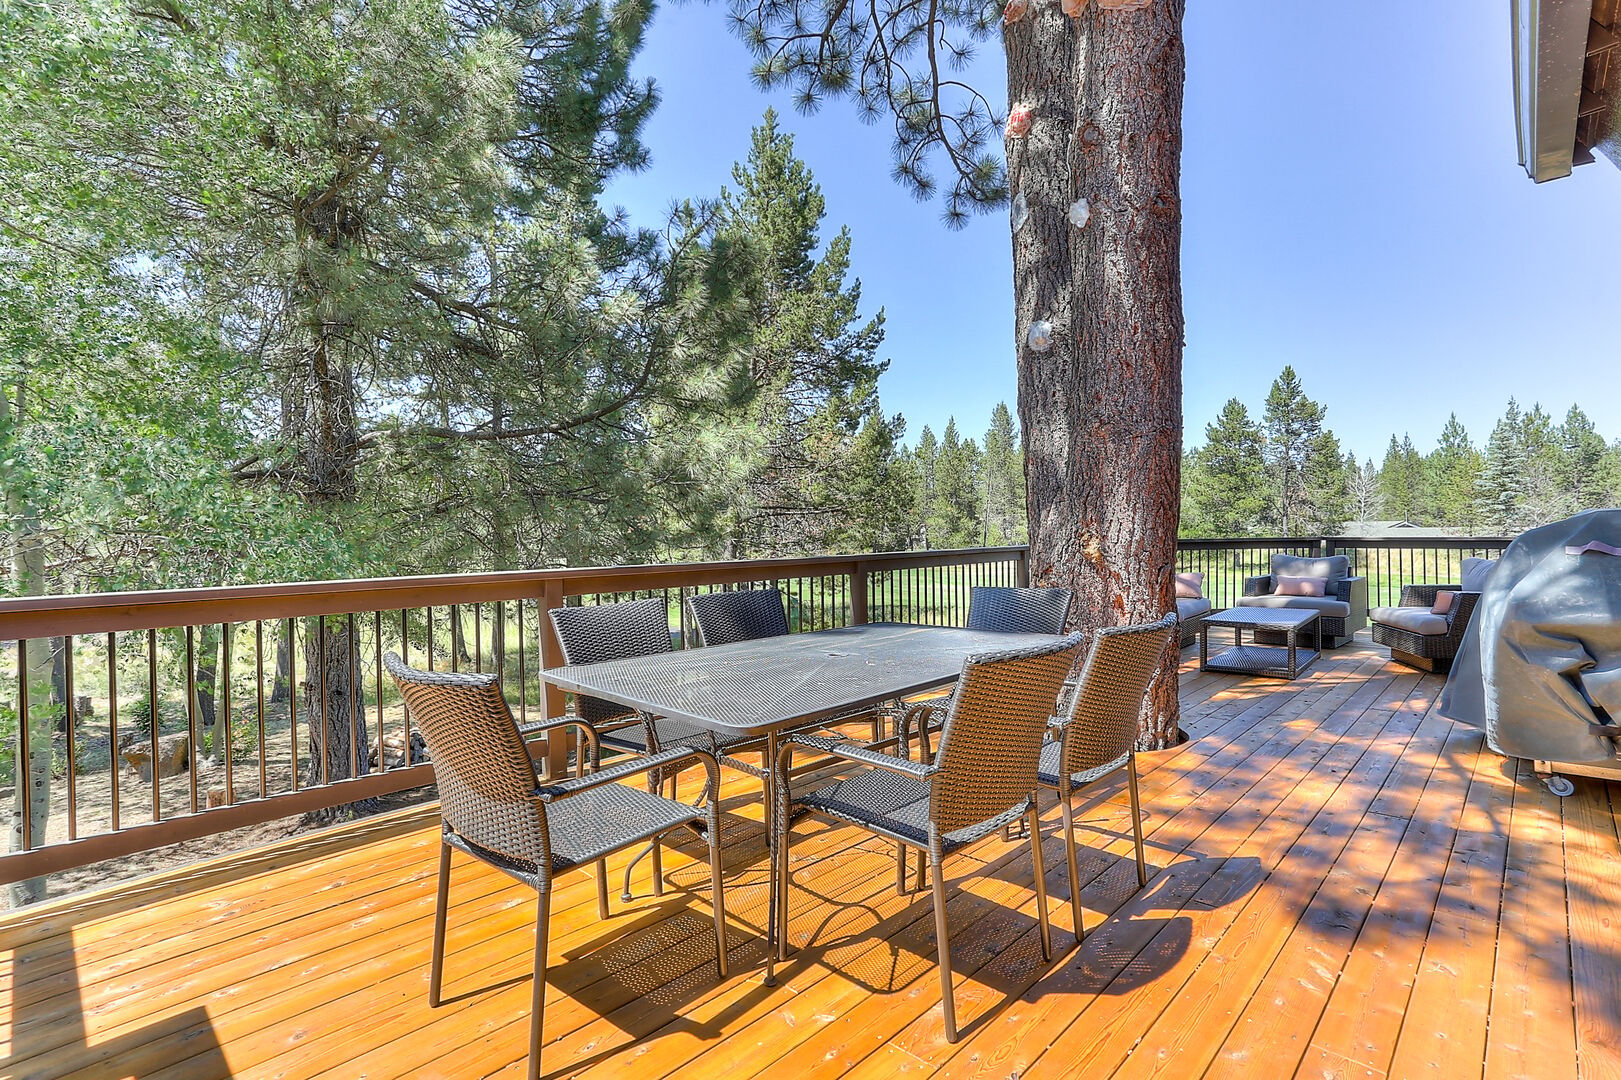 Deck with BBQ and seating - overlooking golf course